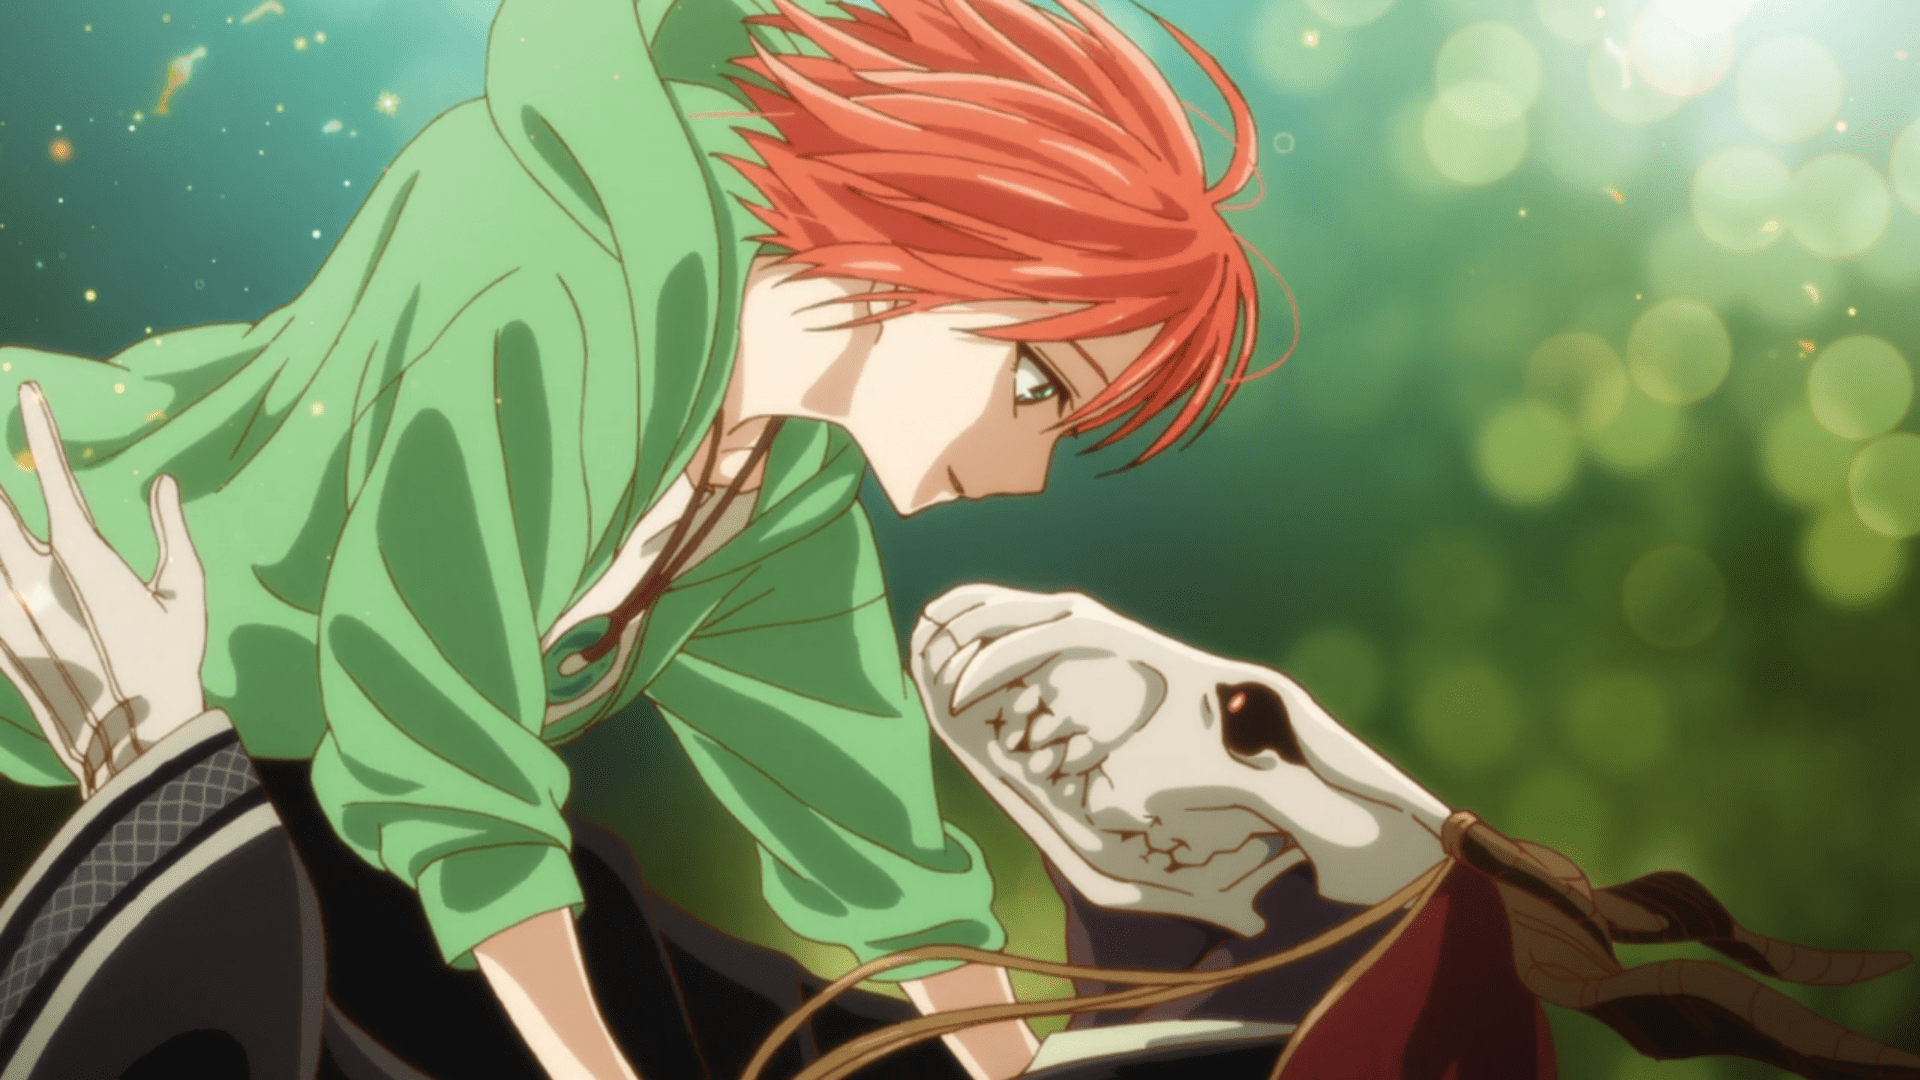 Wallpaper spikes, two, Mahou Tsukai no Yome, Bride of the sorcerer for  mobile and desktop, section сёнэн, resolution 1920x1080 - download